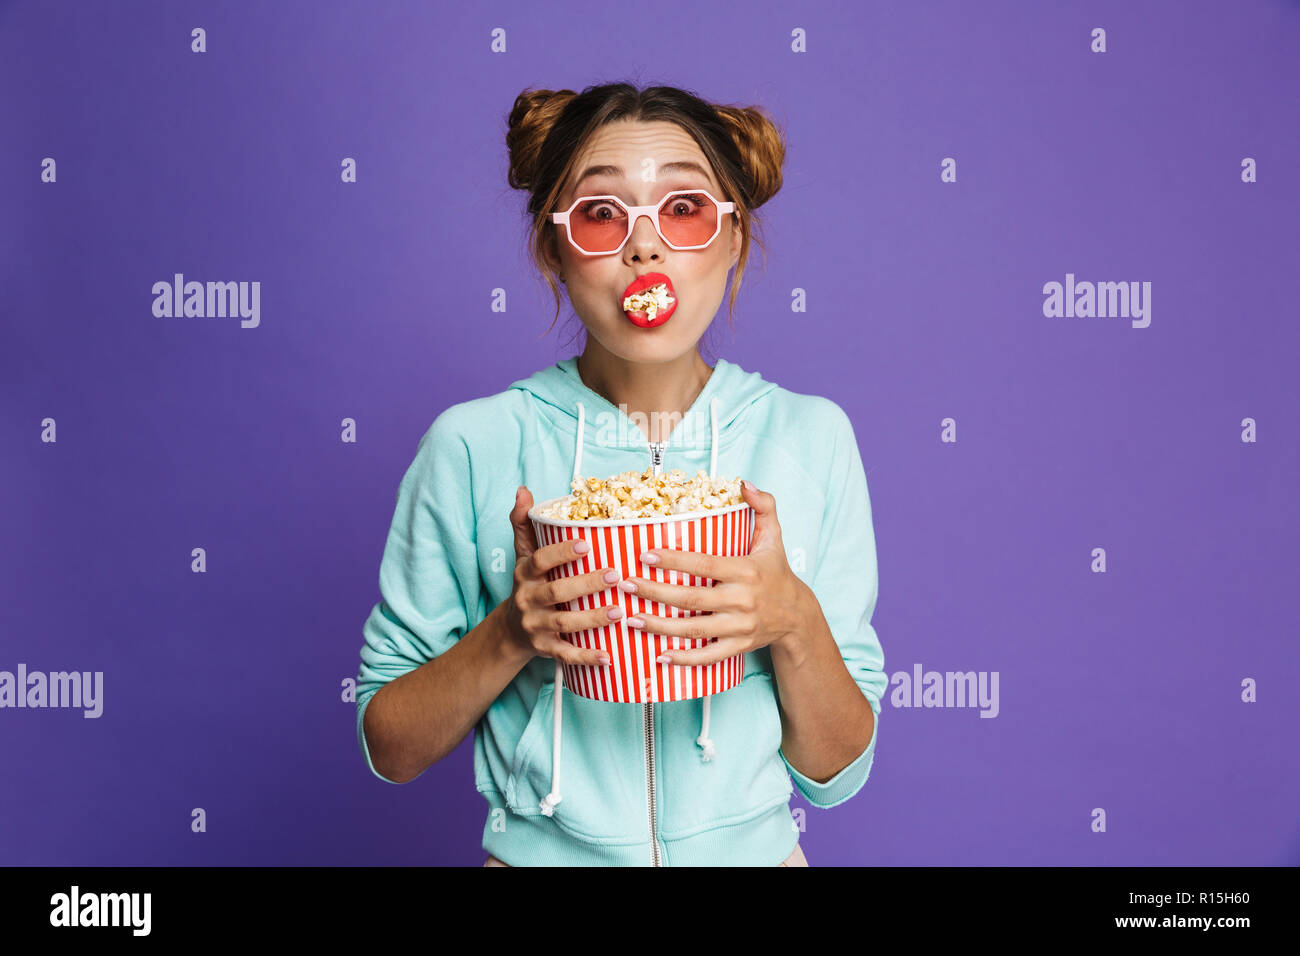 Portrait of a cute young girl with bright makeup isolated over violet background, eating popcorn Stock Photo